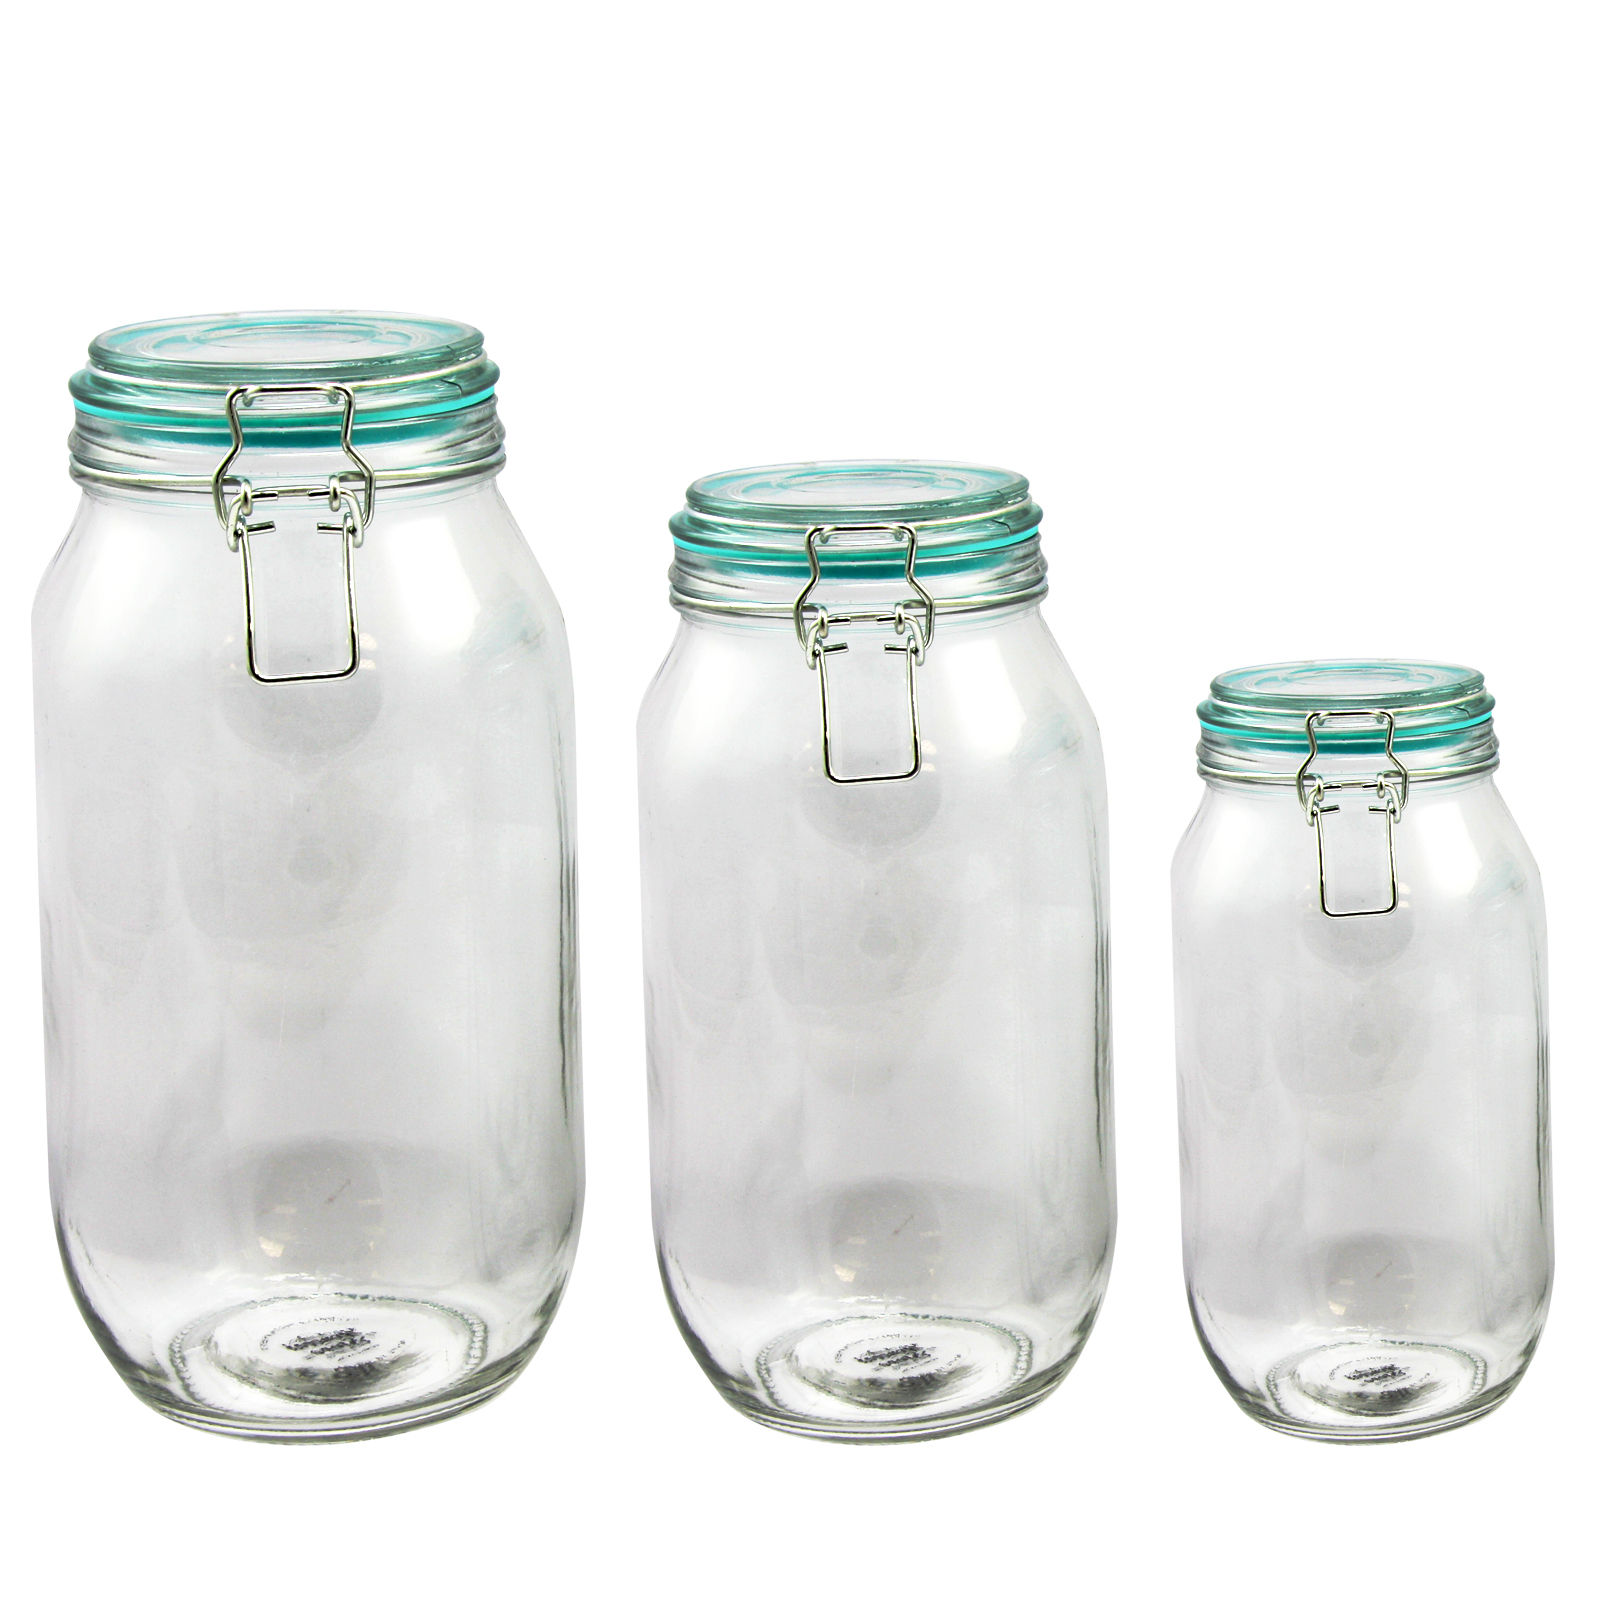 General Store Hollydale 4 Quart Preserving/Storage Jar Set with Wire Bail & Trigger Closure